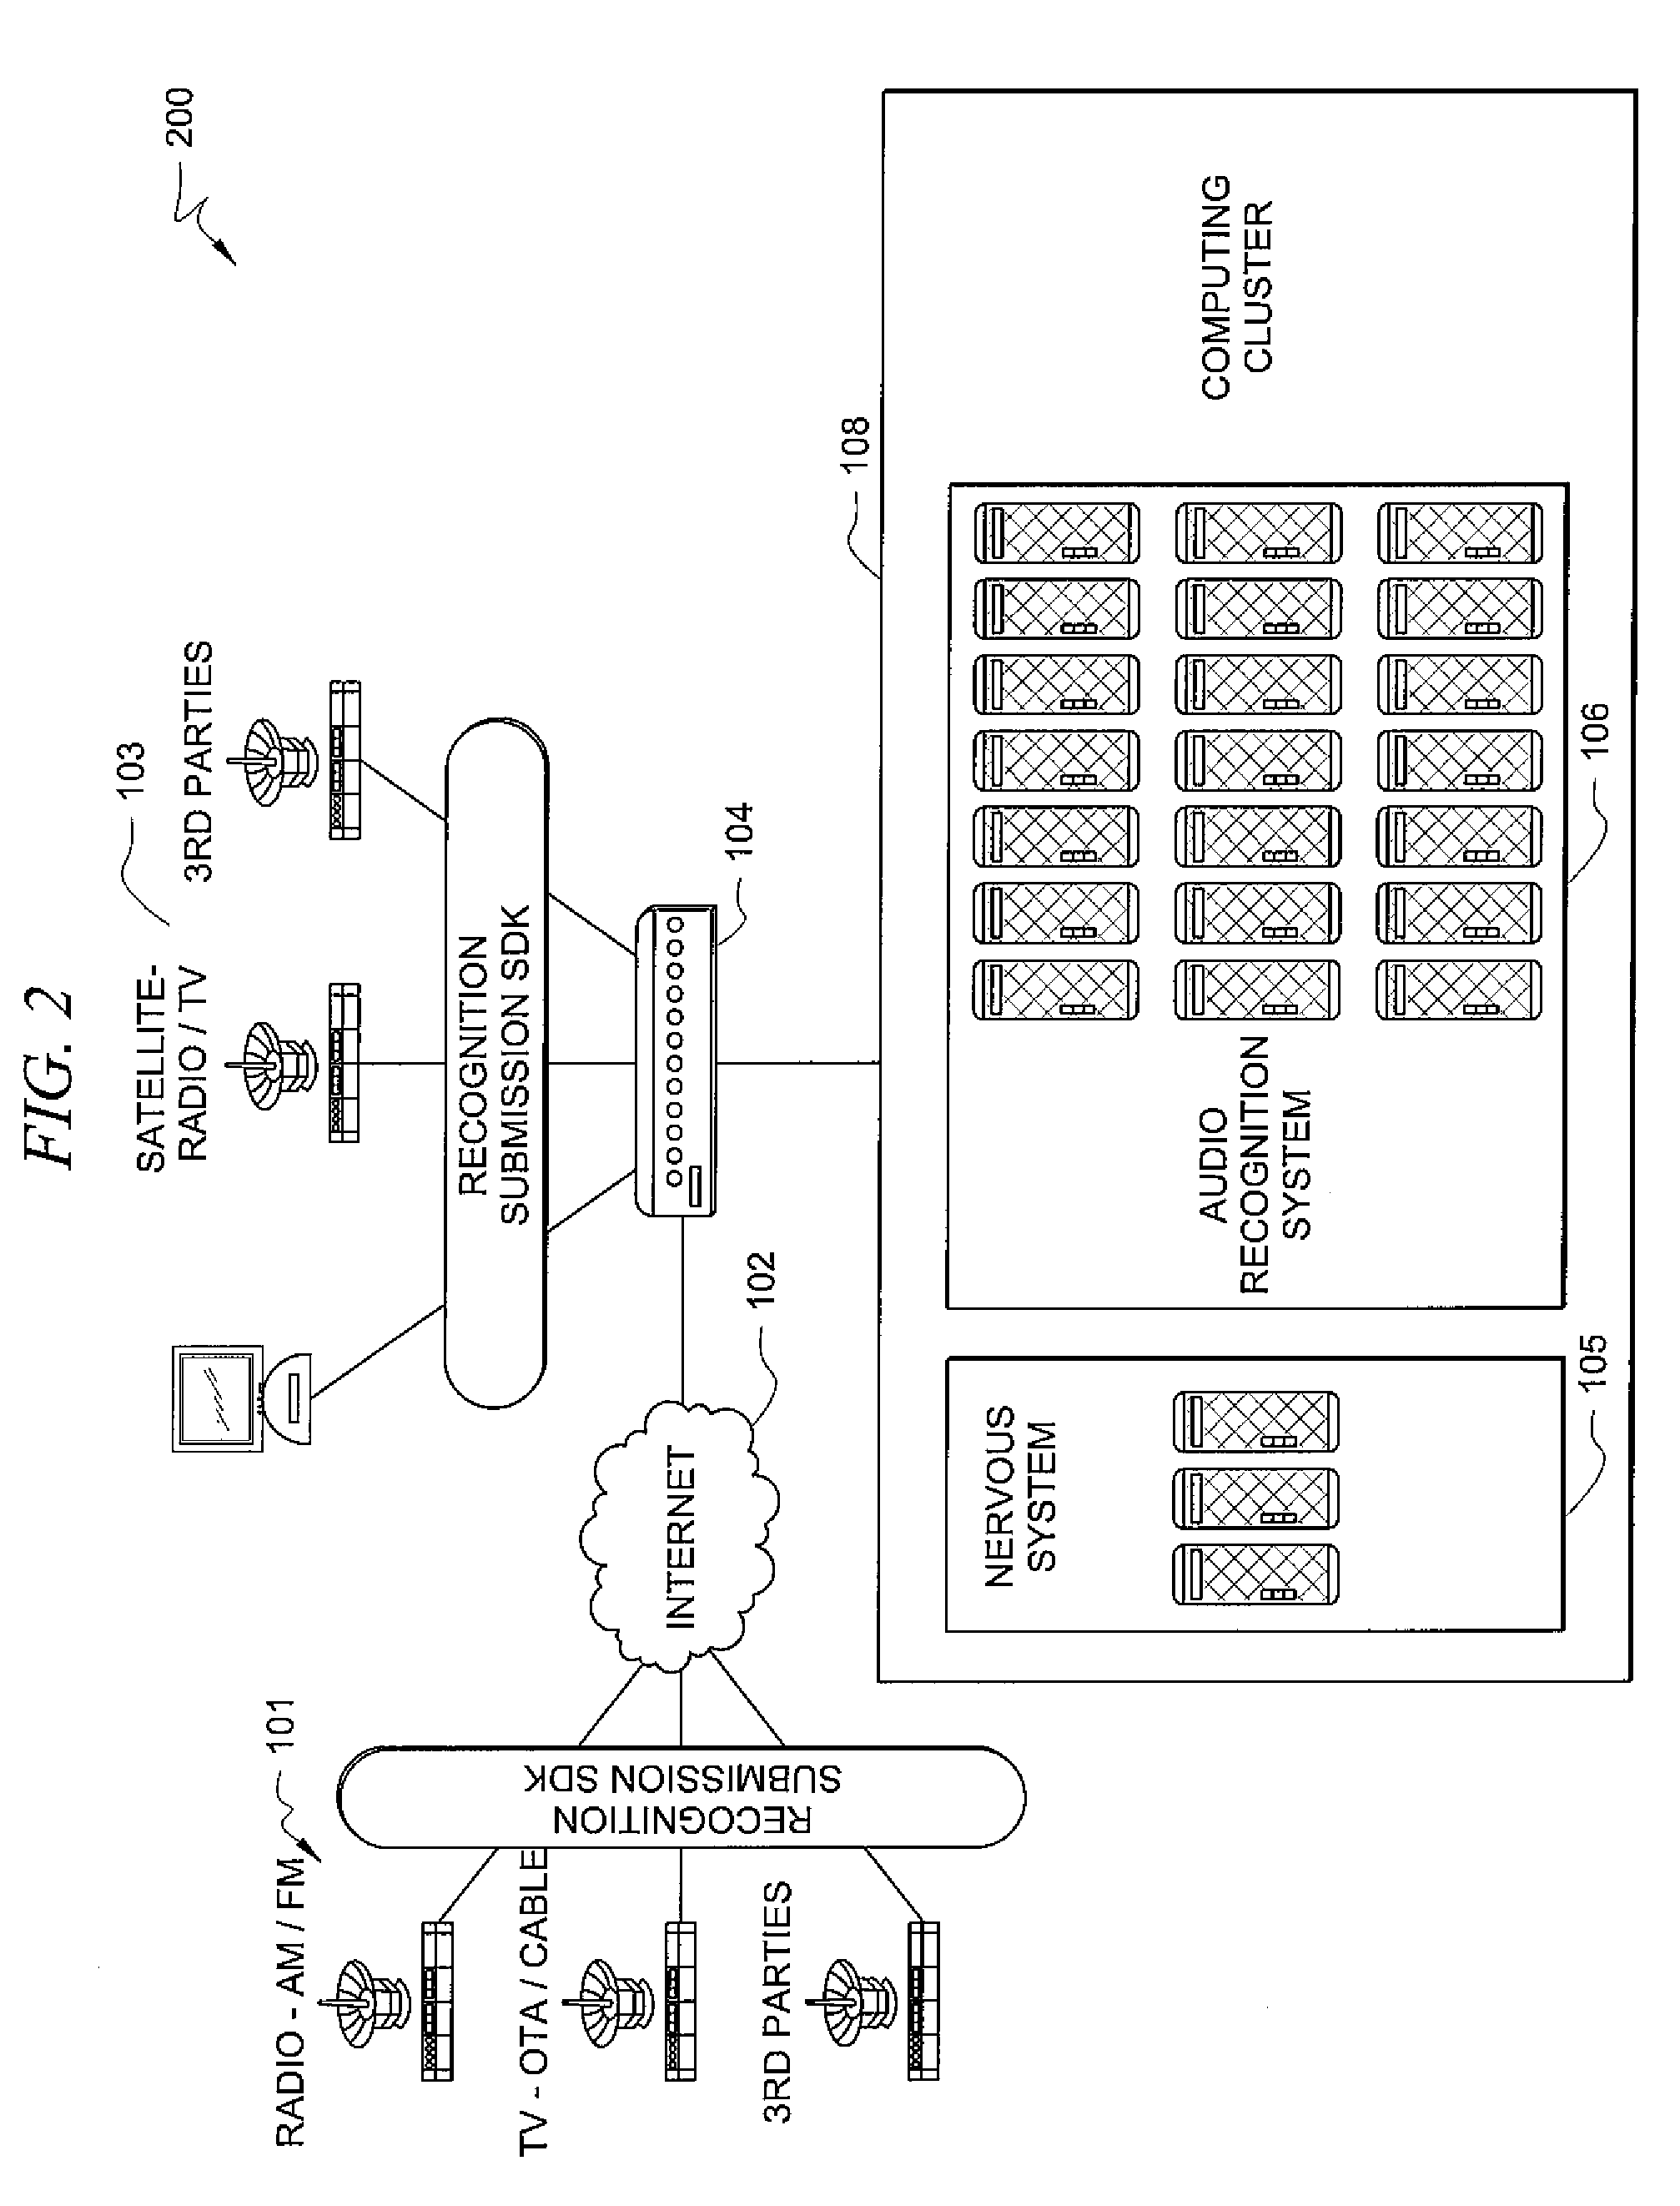 System and method for monitoring and recognizing broadcast data